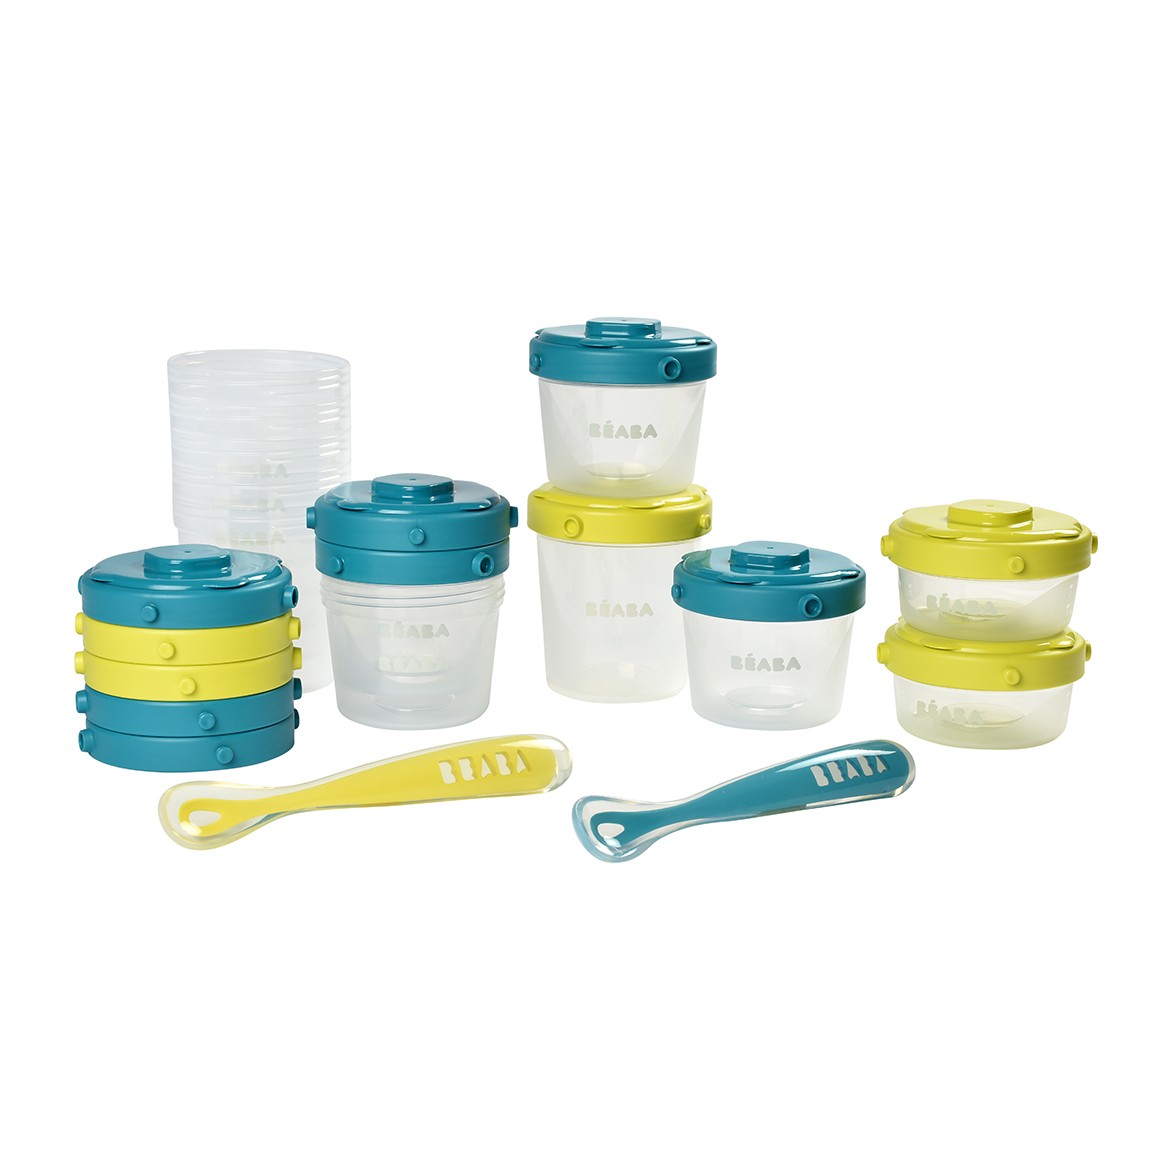 Beaba 1st Meal Set (Set of portions clip+1st age silicone spoon) - Neon/Blue